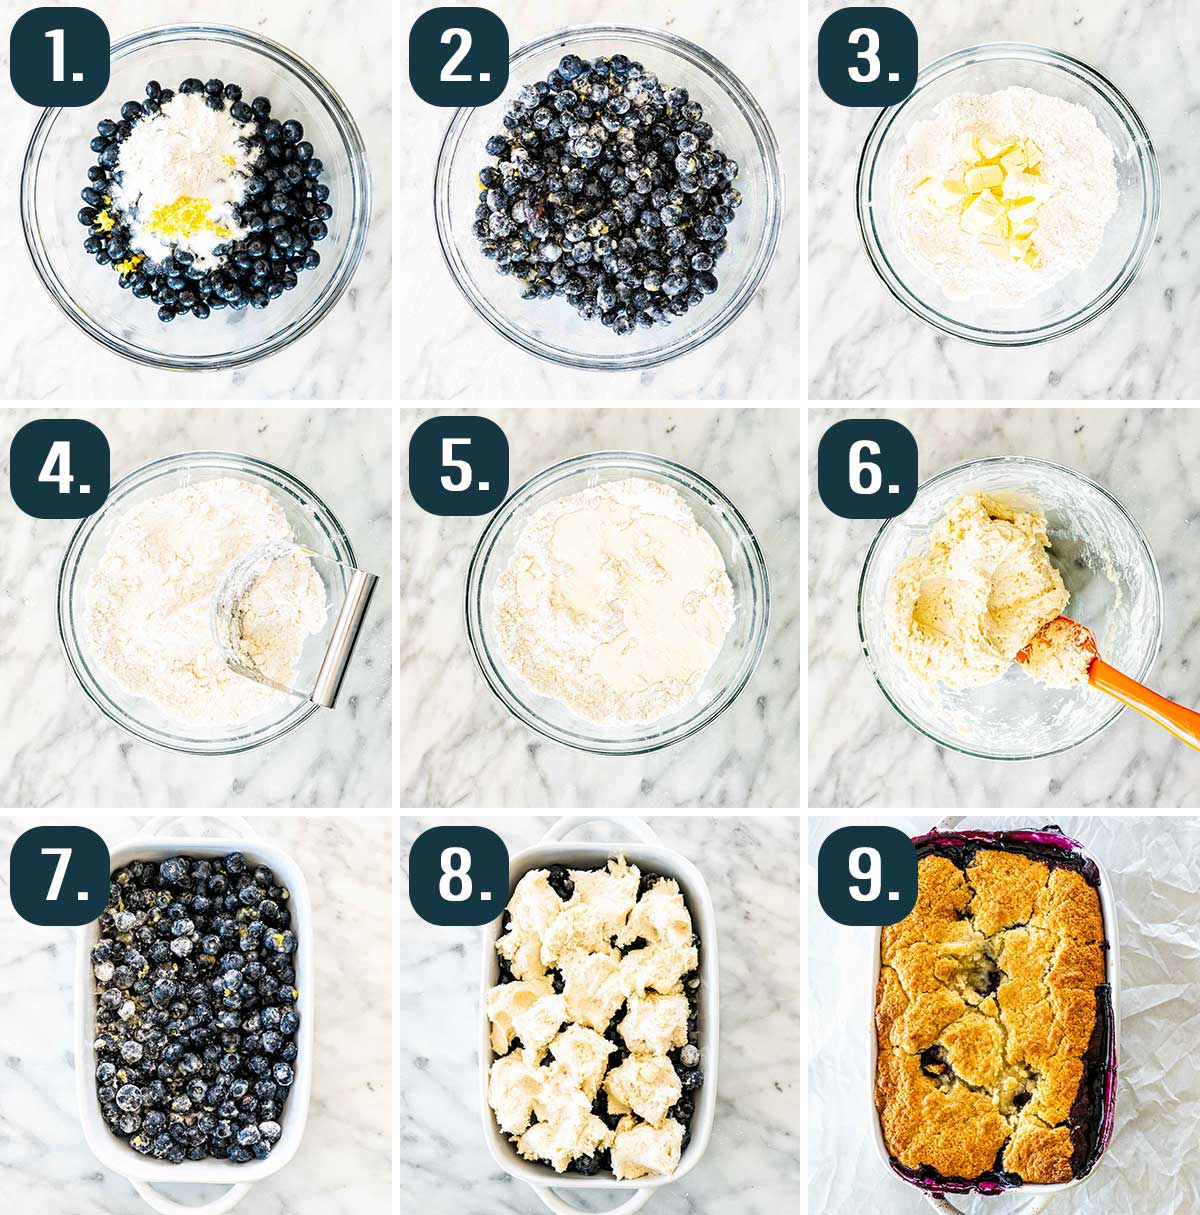 detailed process shots showing how to make a blueberry cobbler